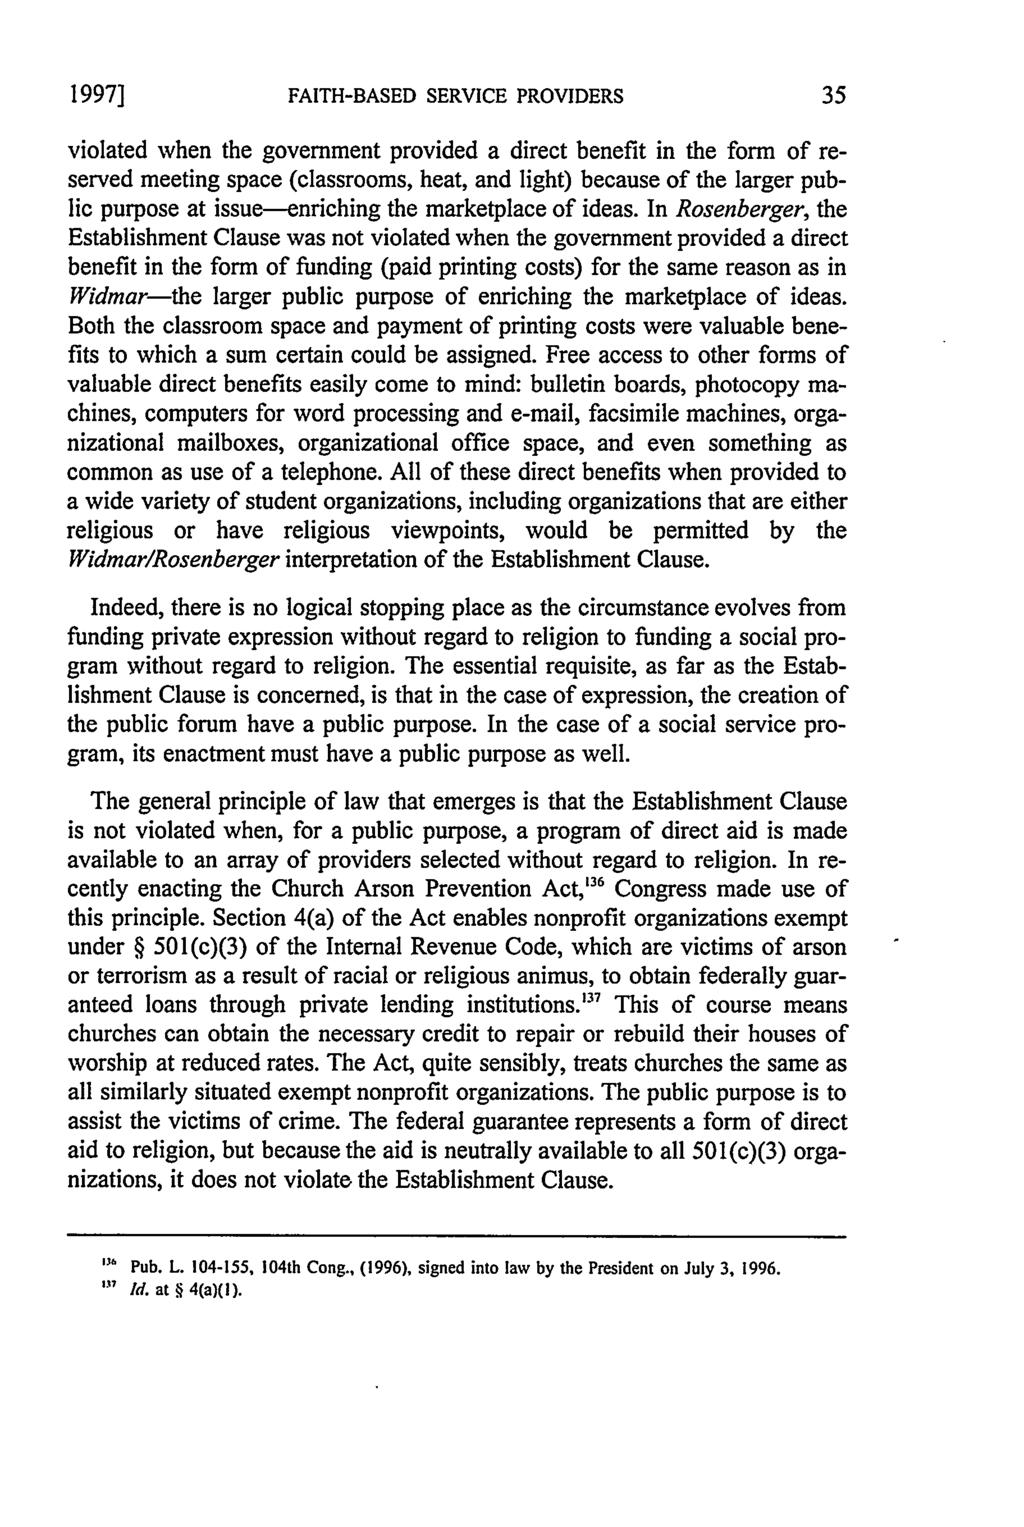 1997] FAITH-BASED SERVICE PROVIDERS violated when the government provided a direct benefit in the form of reserved meeting space (classrooms, heat, and light) because of the larger public purpose at